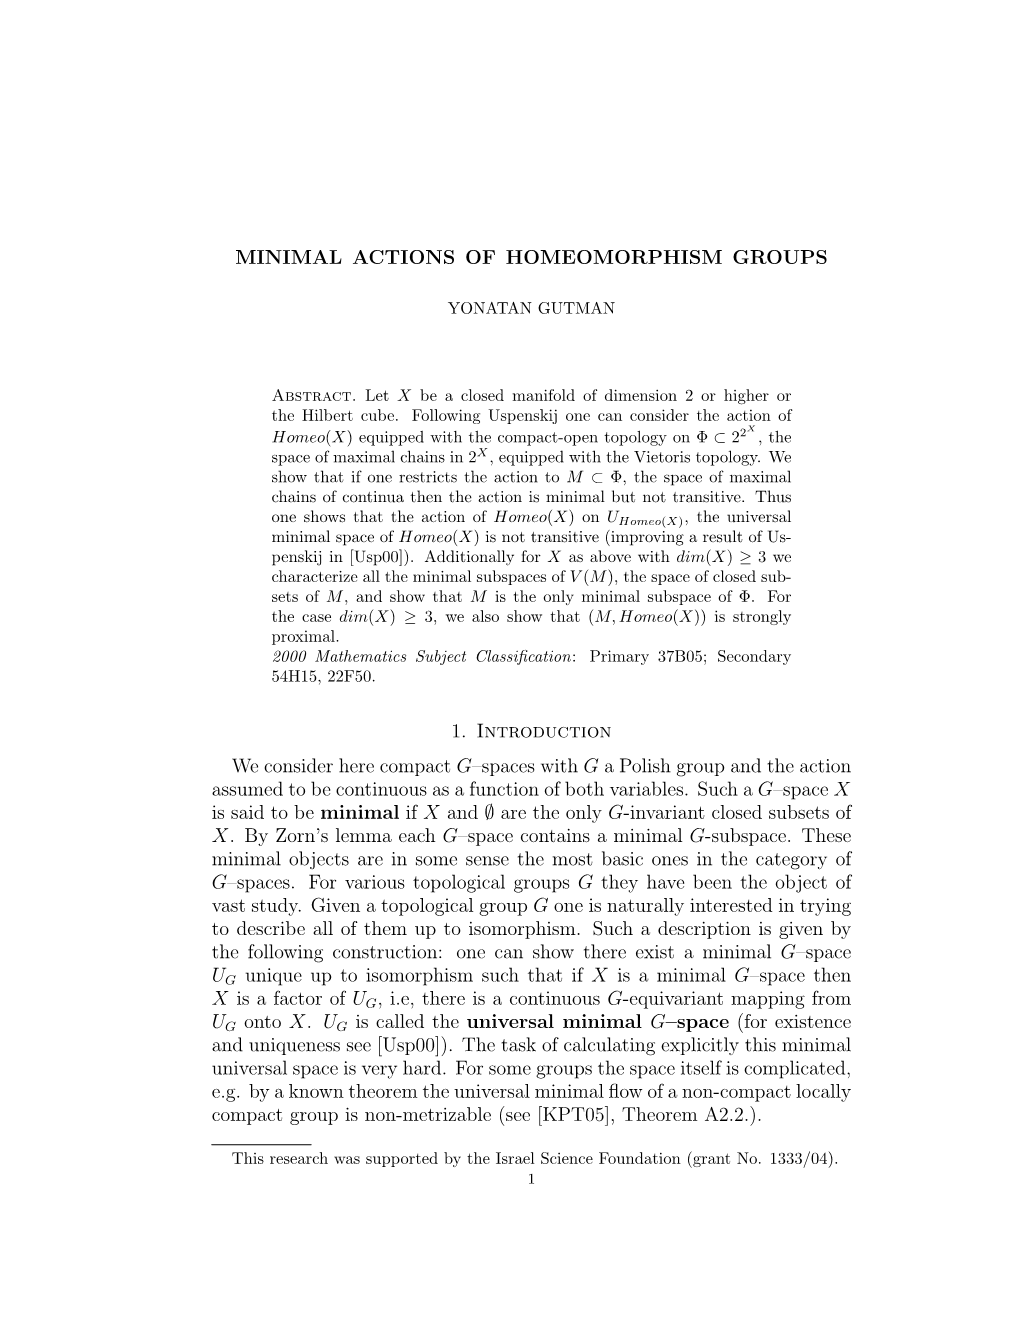 Minimal Actions of Homeomorphism Groups